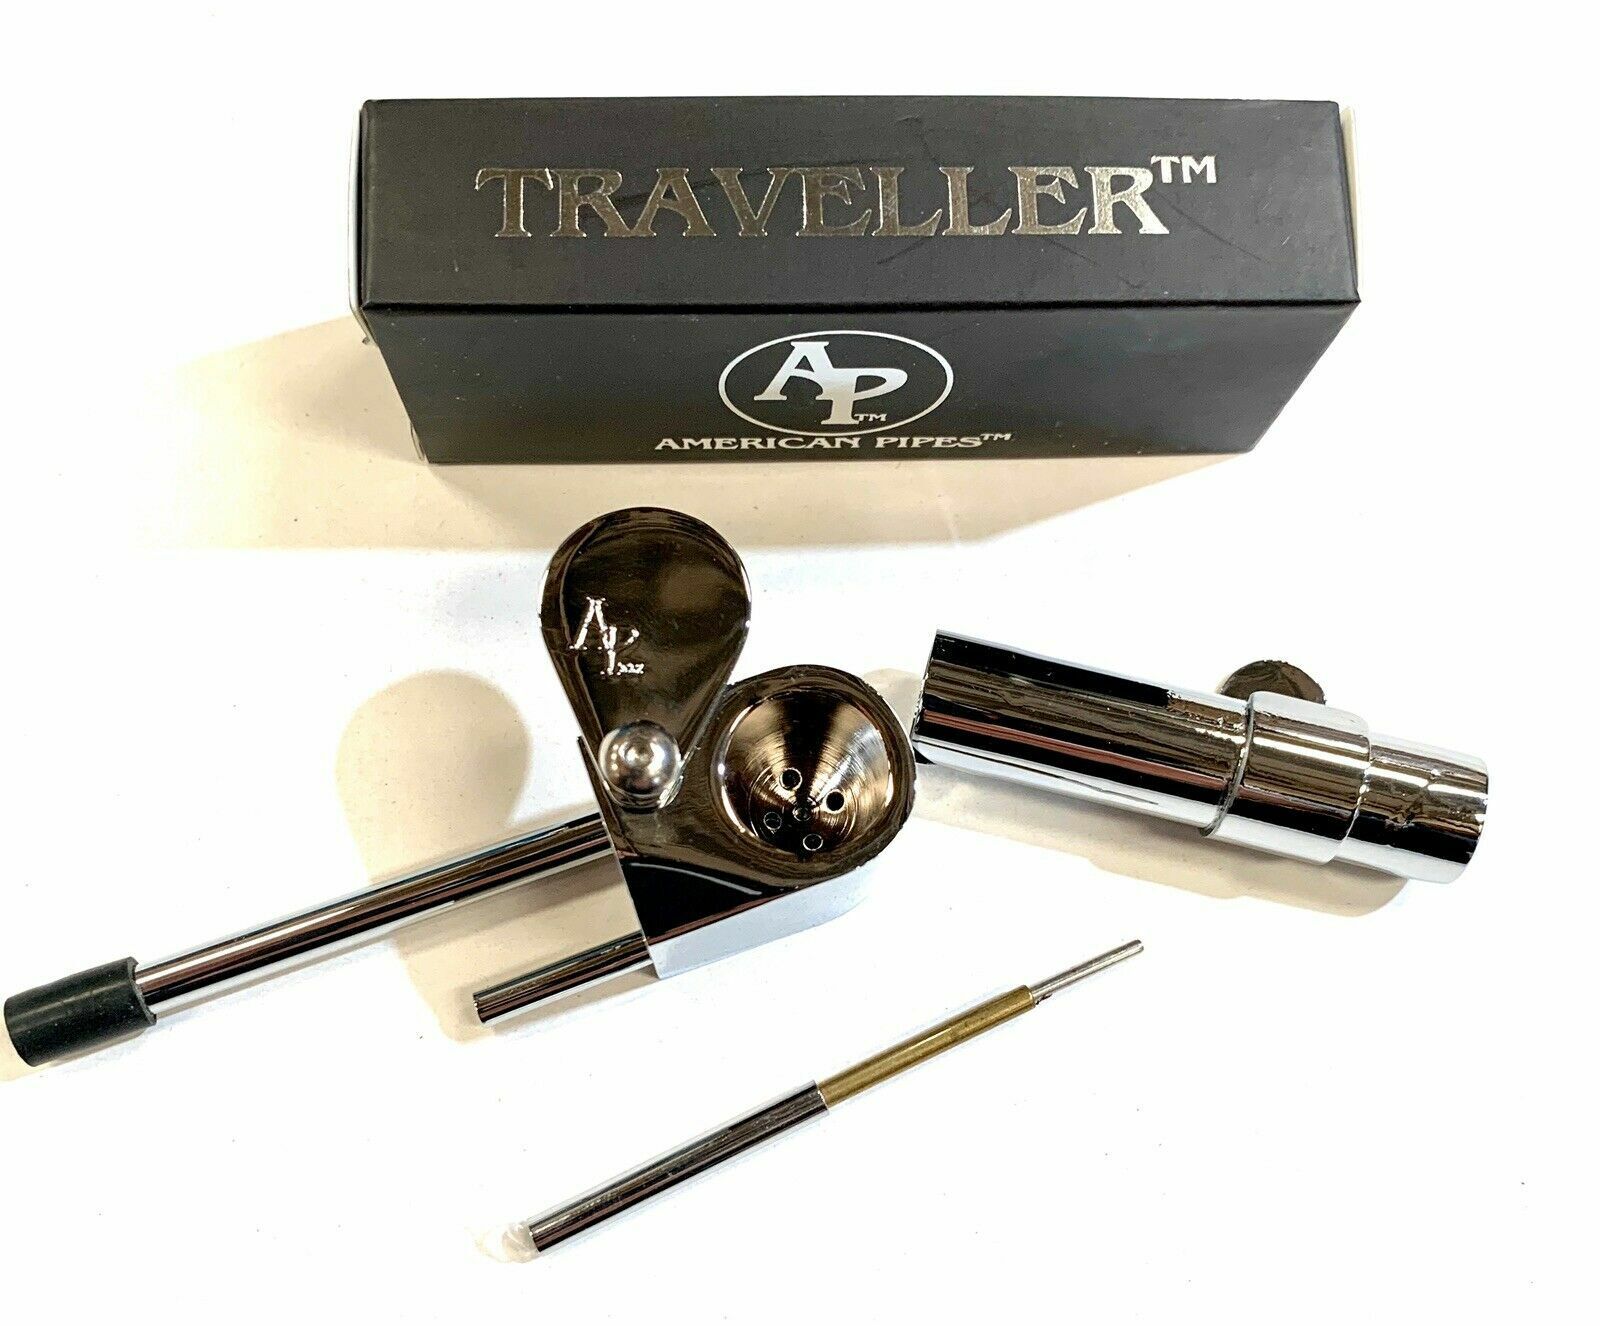 ORIGINAL AMERICANPIPES(tm)TRAVELLER(TM) DELUXE CHROME PLATED  SOLID  BRASS